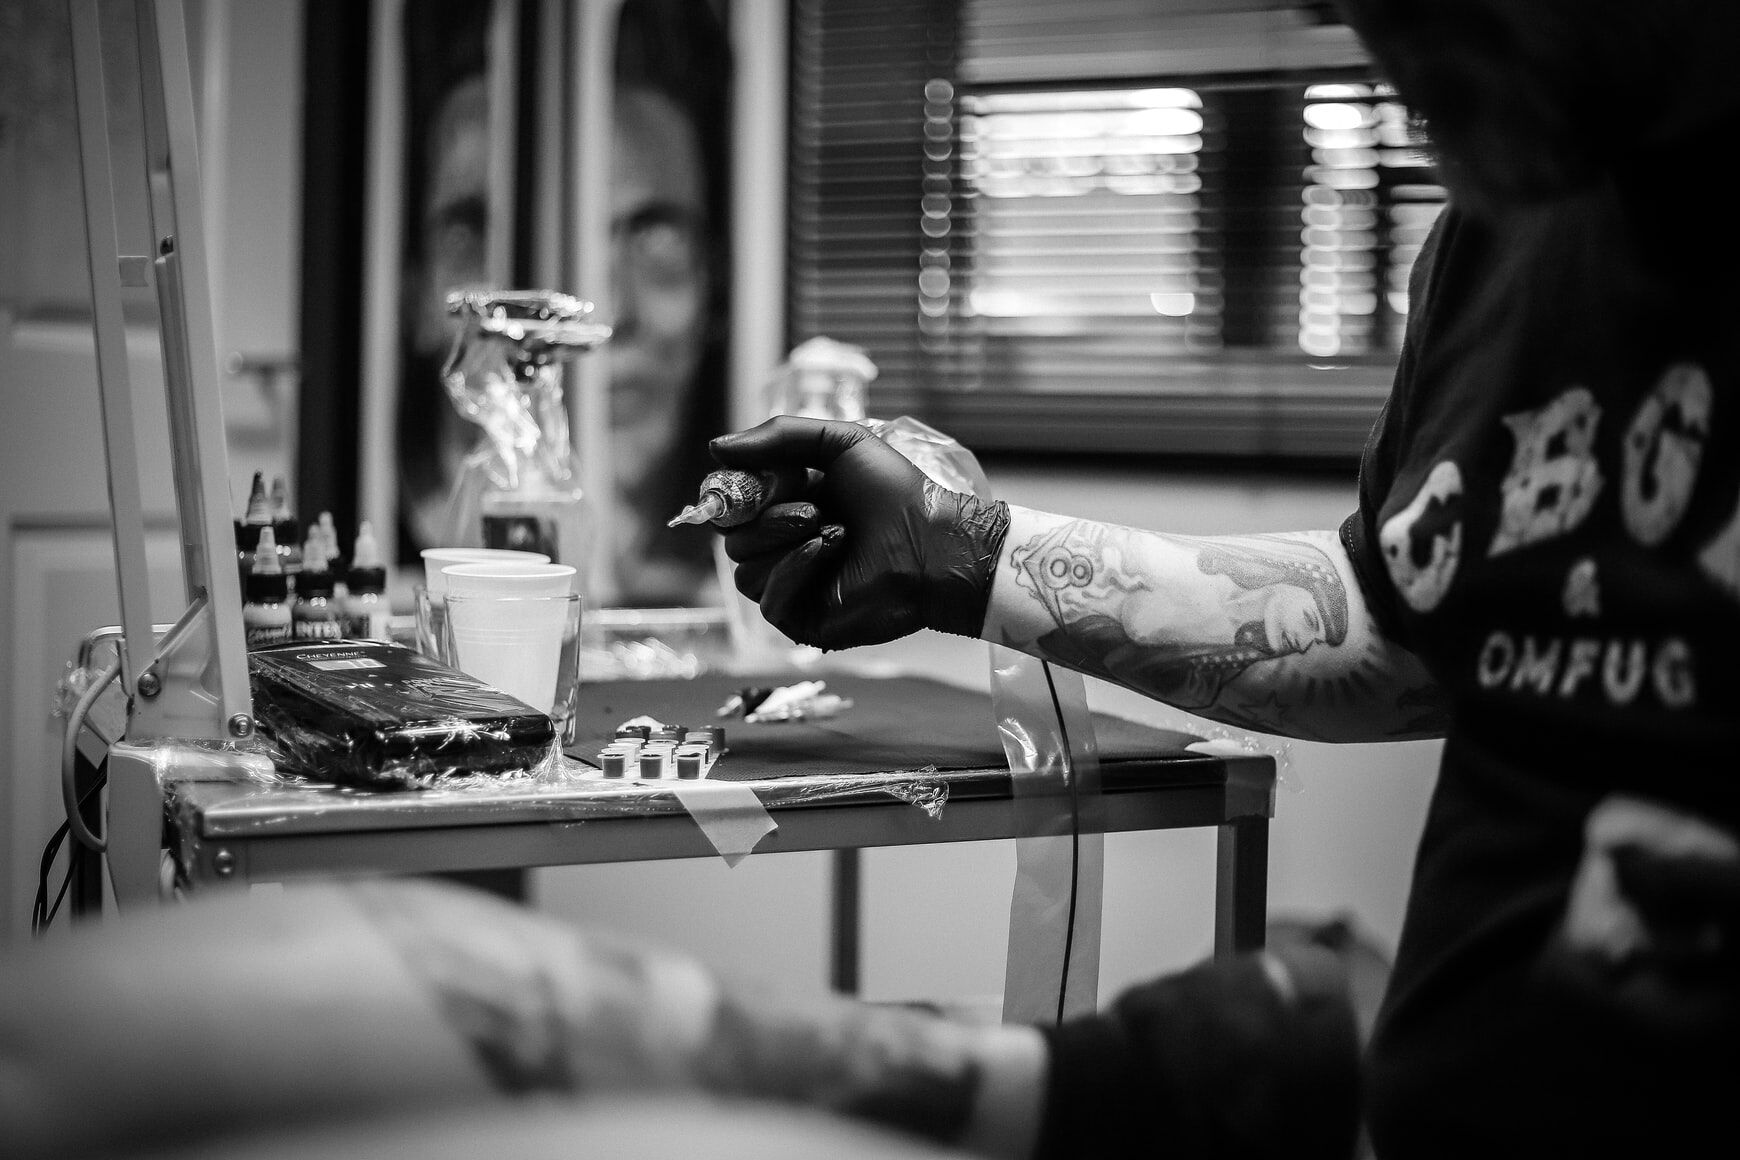 Opinion: Tattoos should be accepted in the workplace - The Sentinel